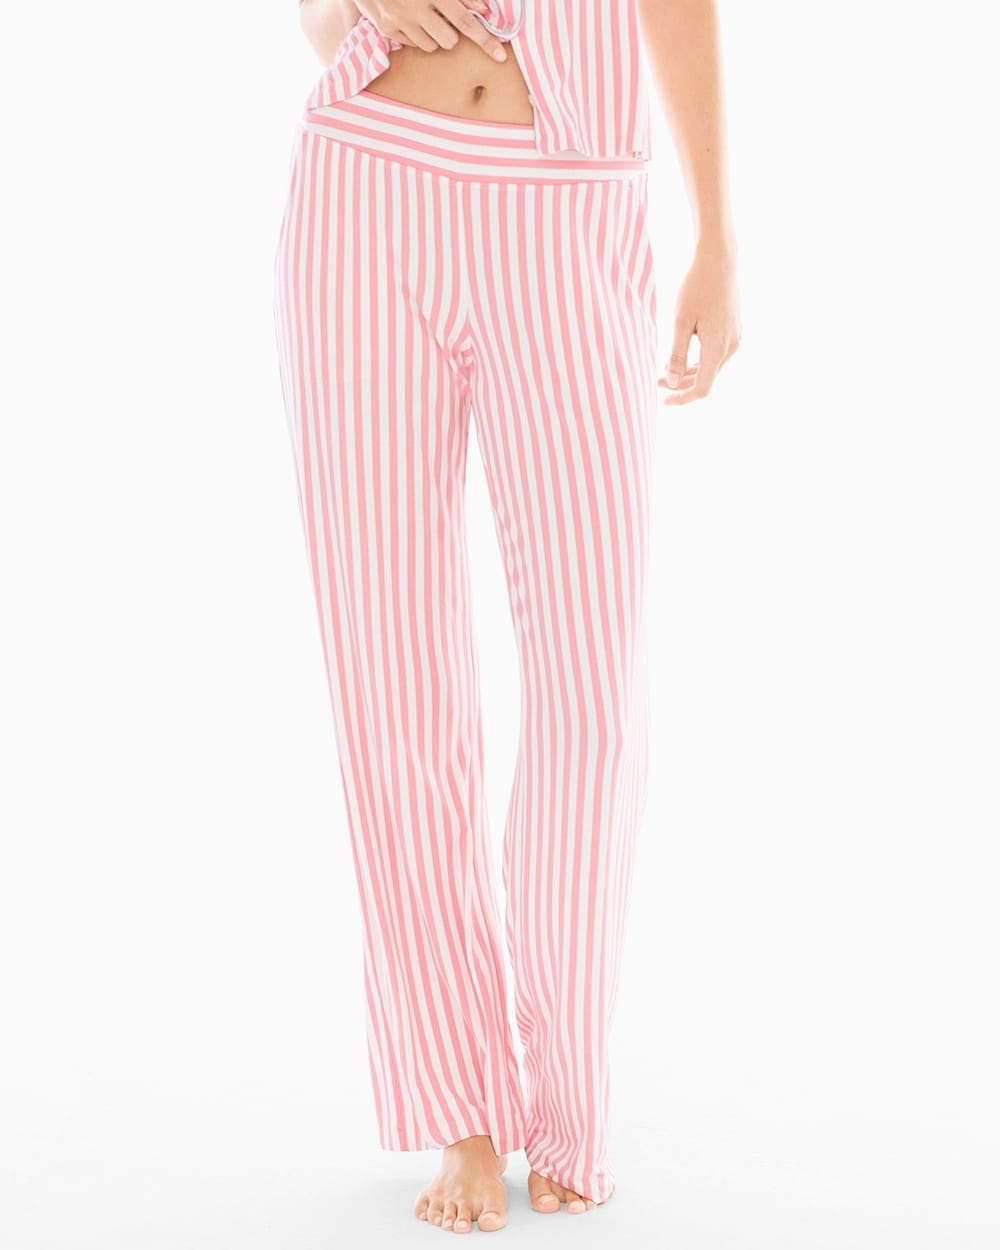 Cool Nights Pajama Pants Relaxed Stripe Pink Icing